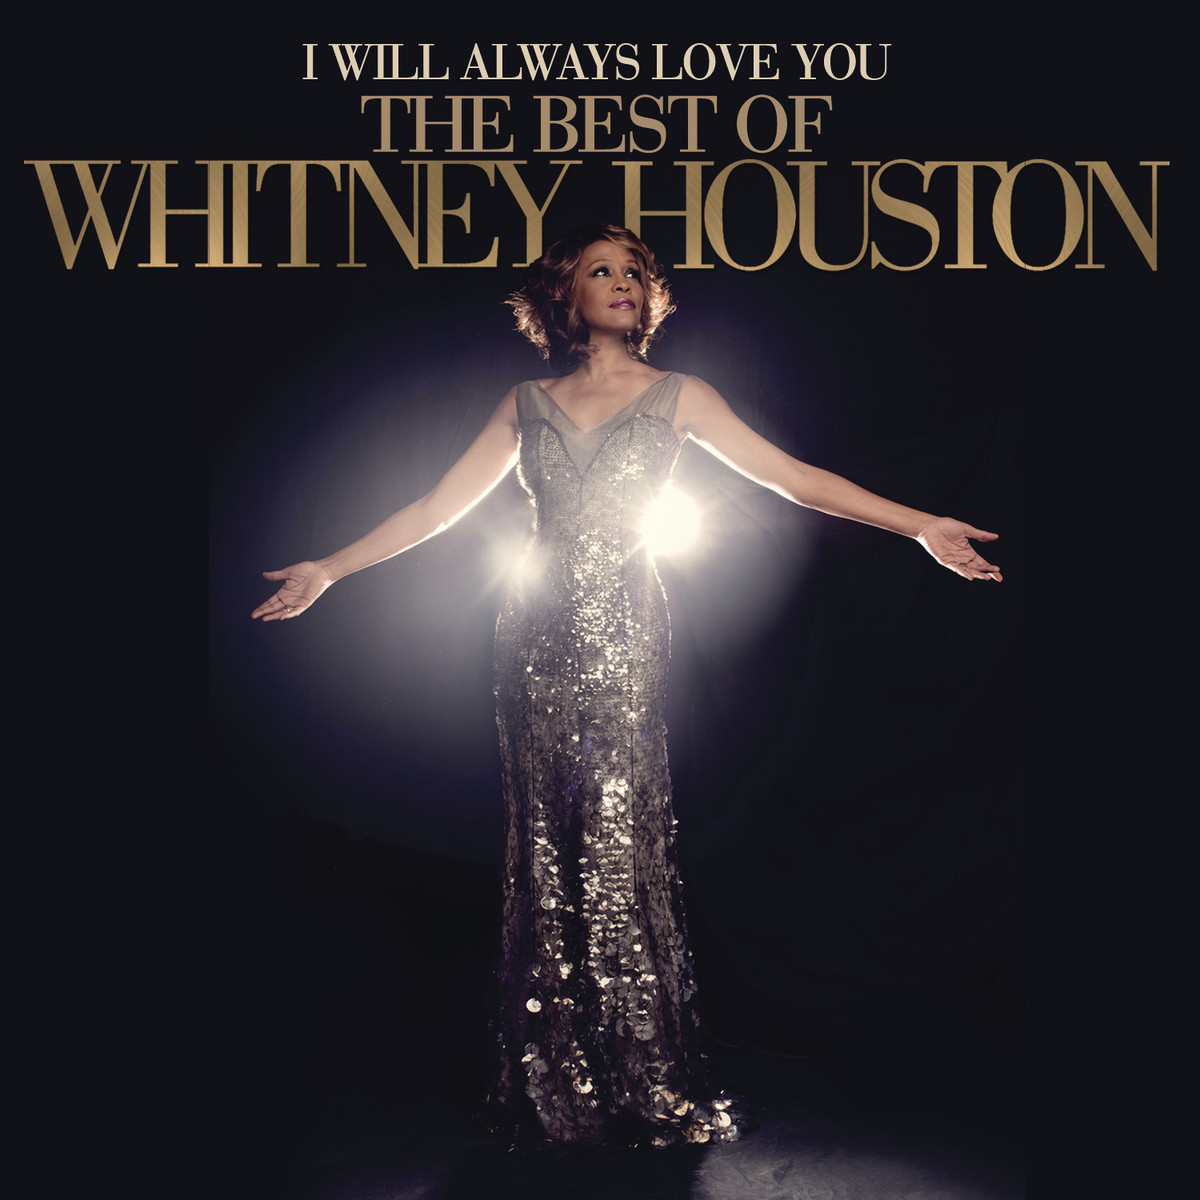 Whitney-Houston-I-Will-Always-Love-You-The-Best-Of-2012